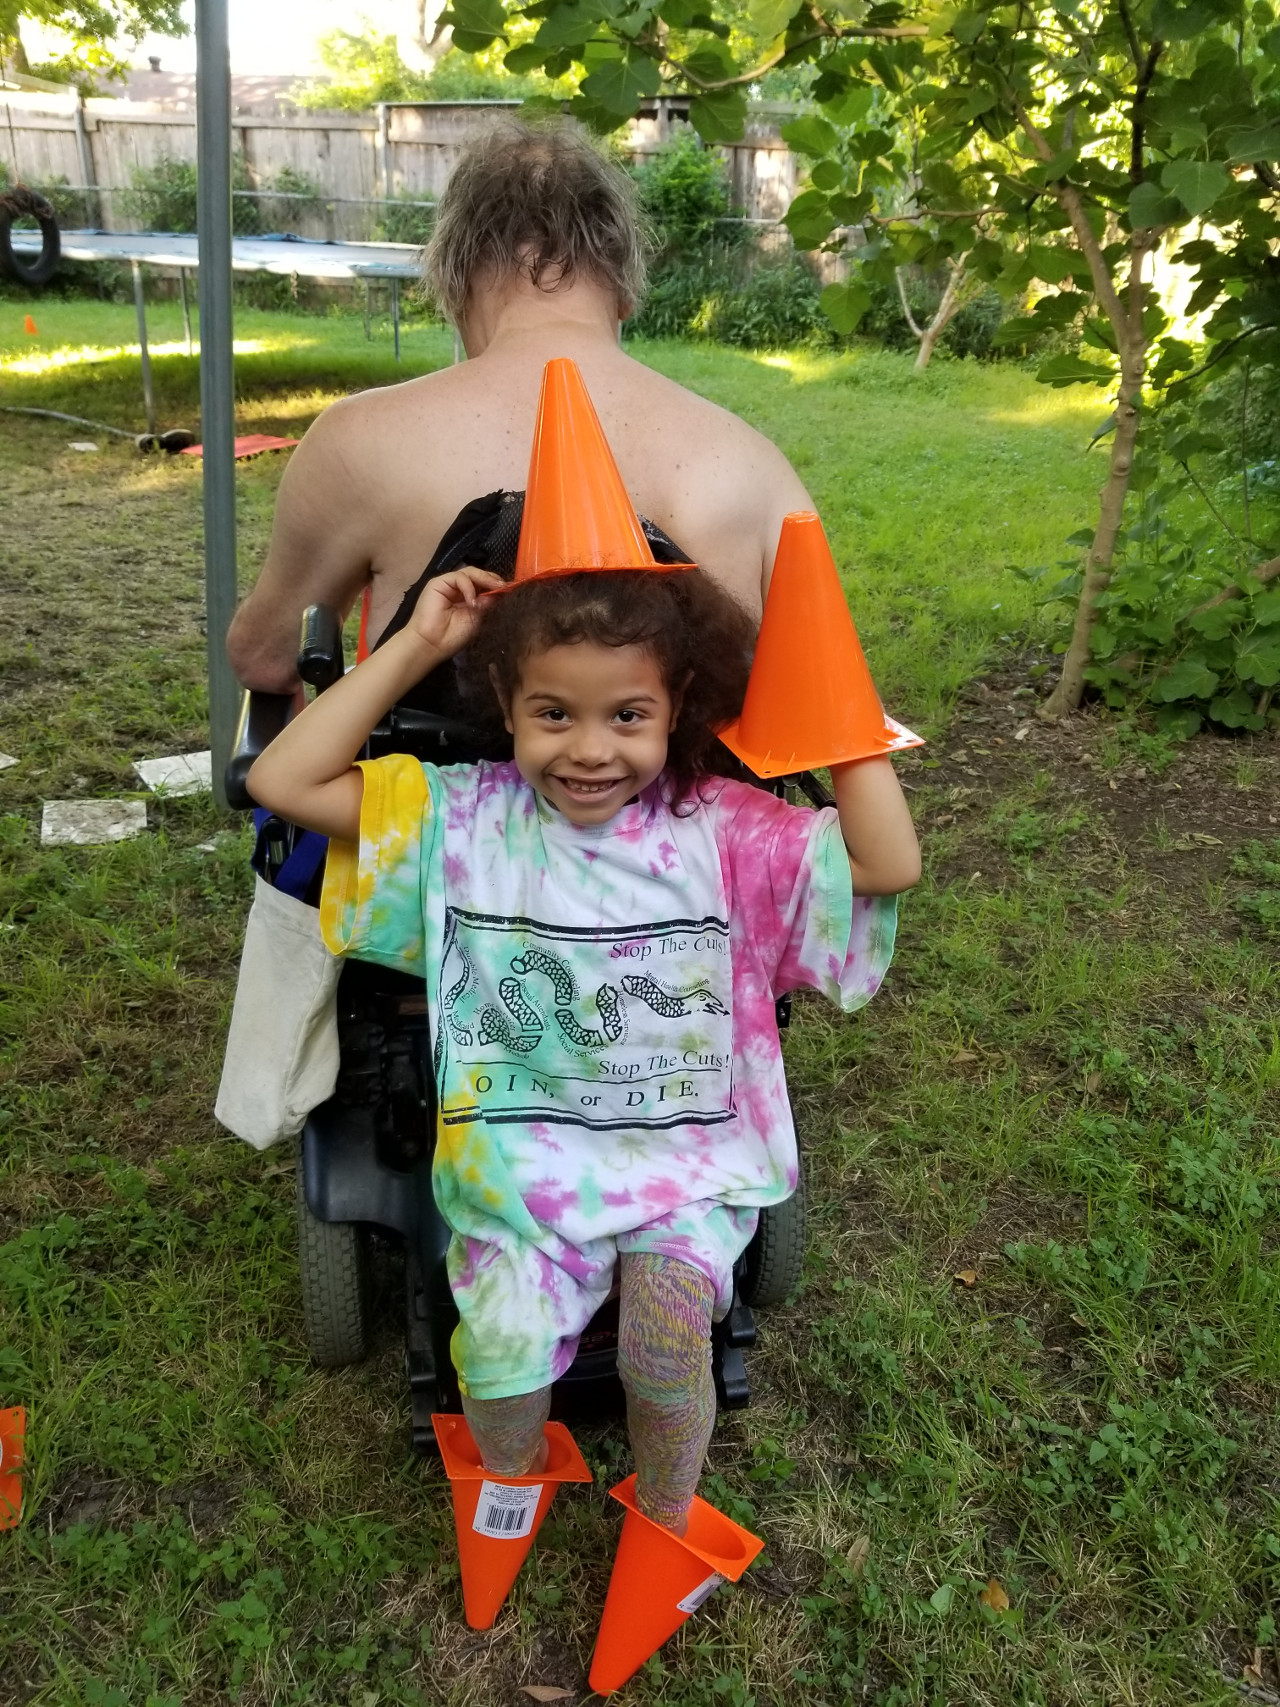 Young girl sits on the back of her grandpa’s motorized wheelchair. She is smiling and has little traffic cones on her head, feet and hand.